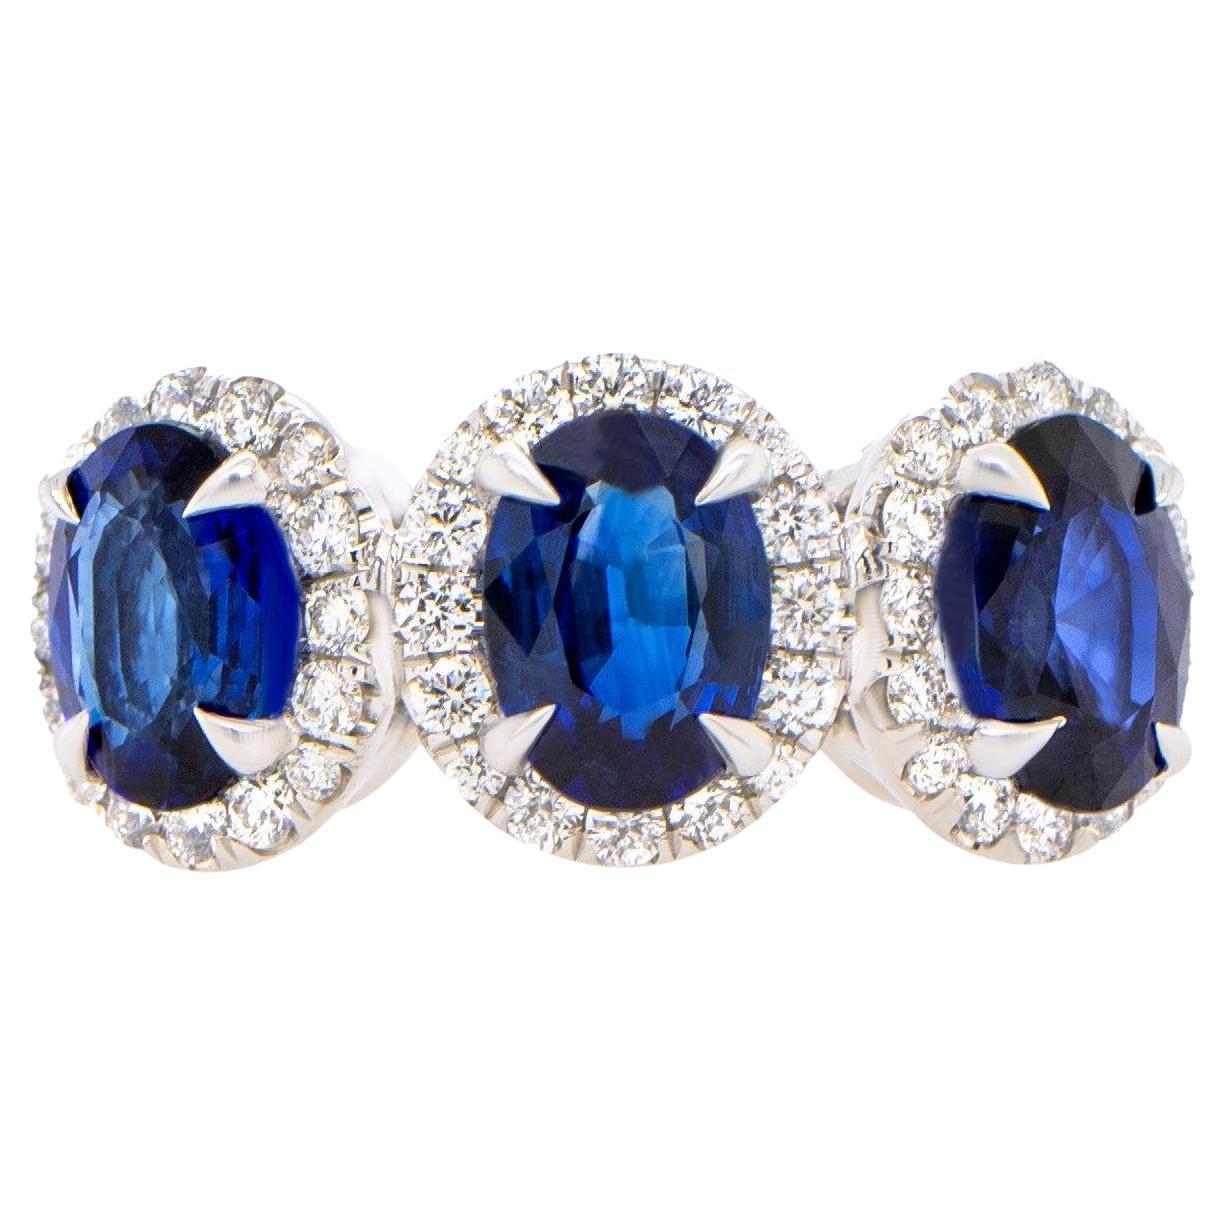 Three Sapphires Ring Diamond Setting 3.80 Carats 18K White Gold For Sale